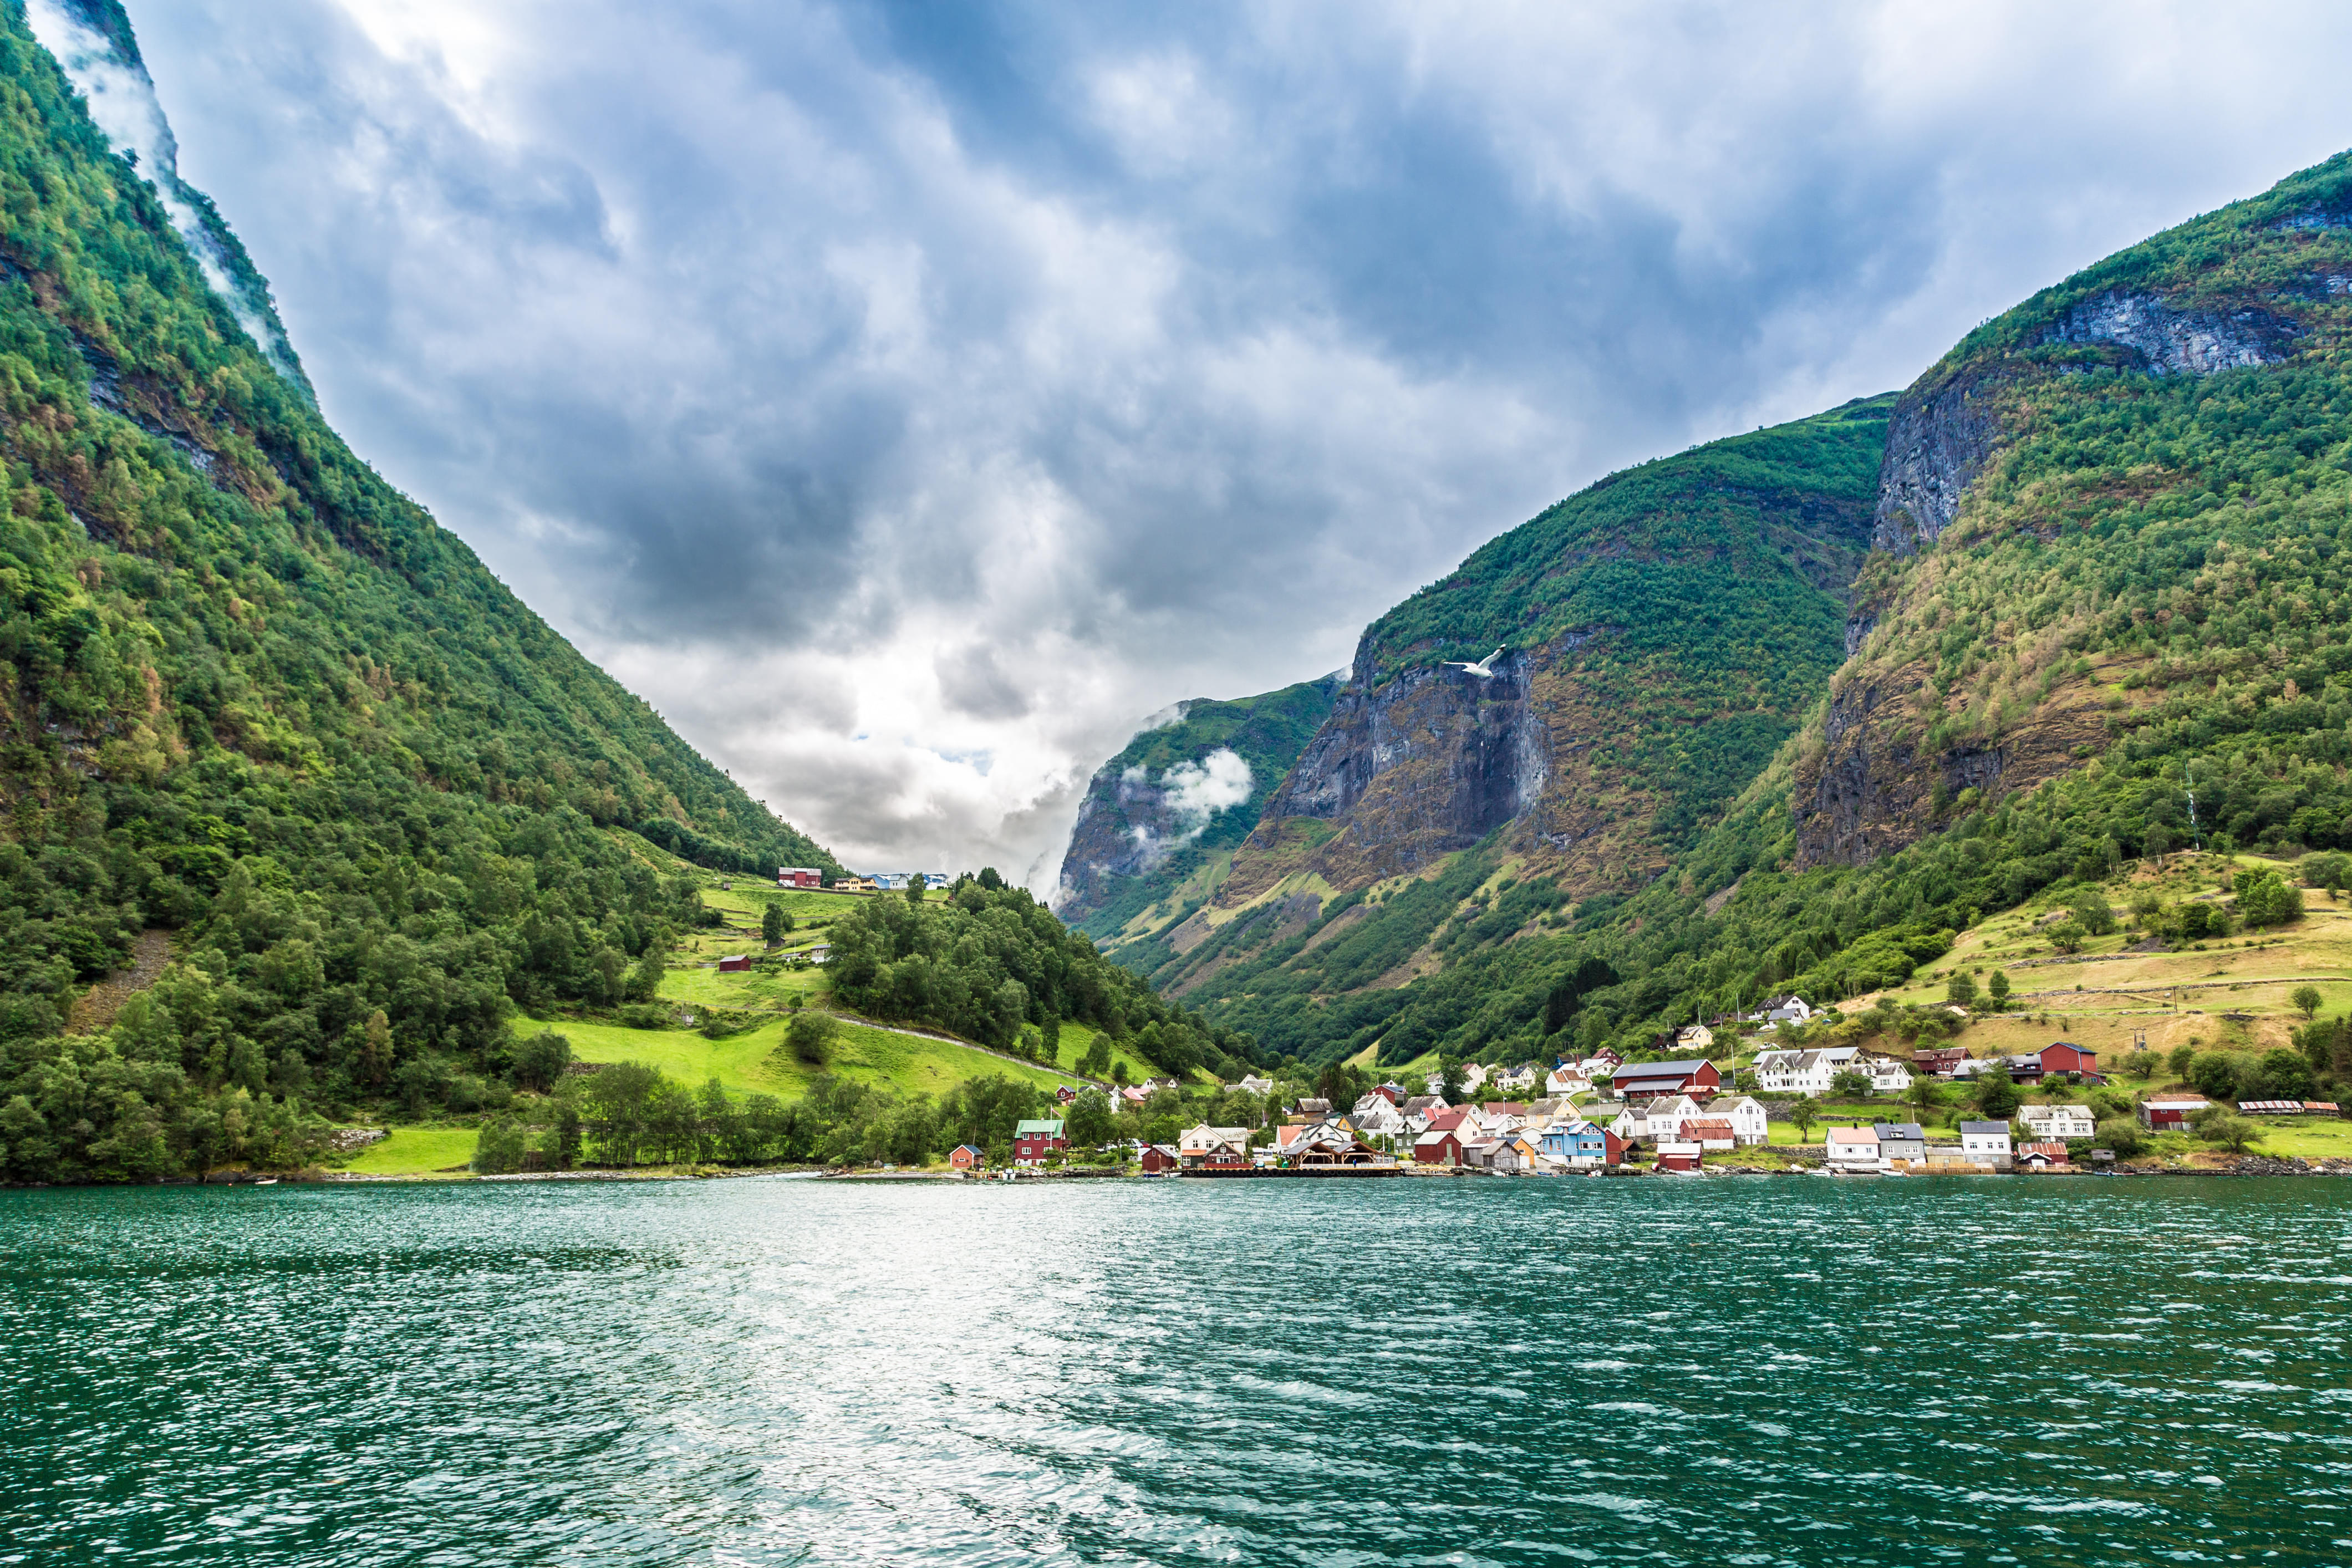 Best Places To Stay in Norway